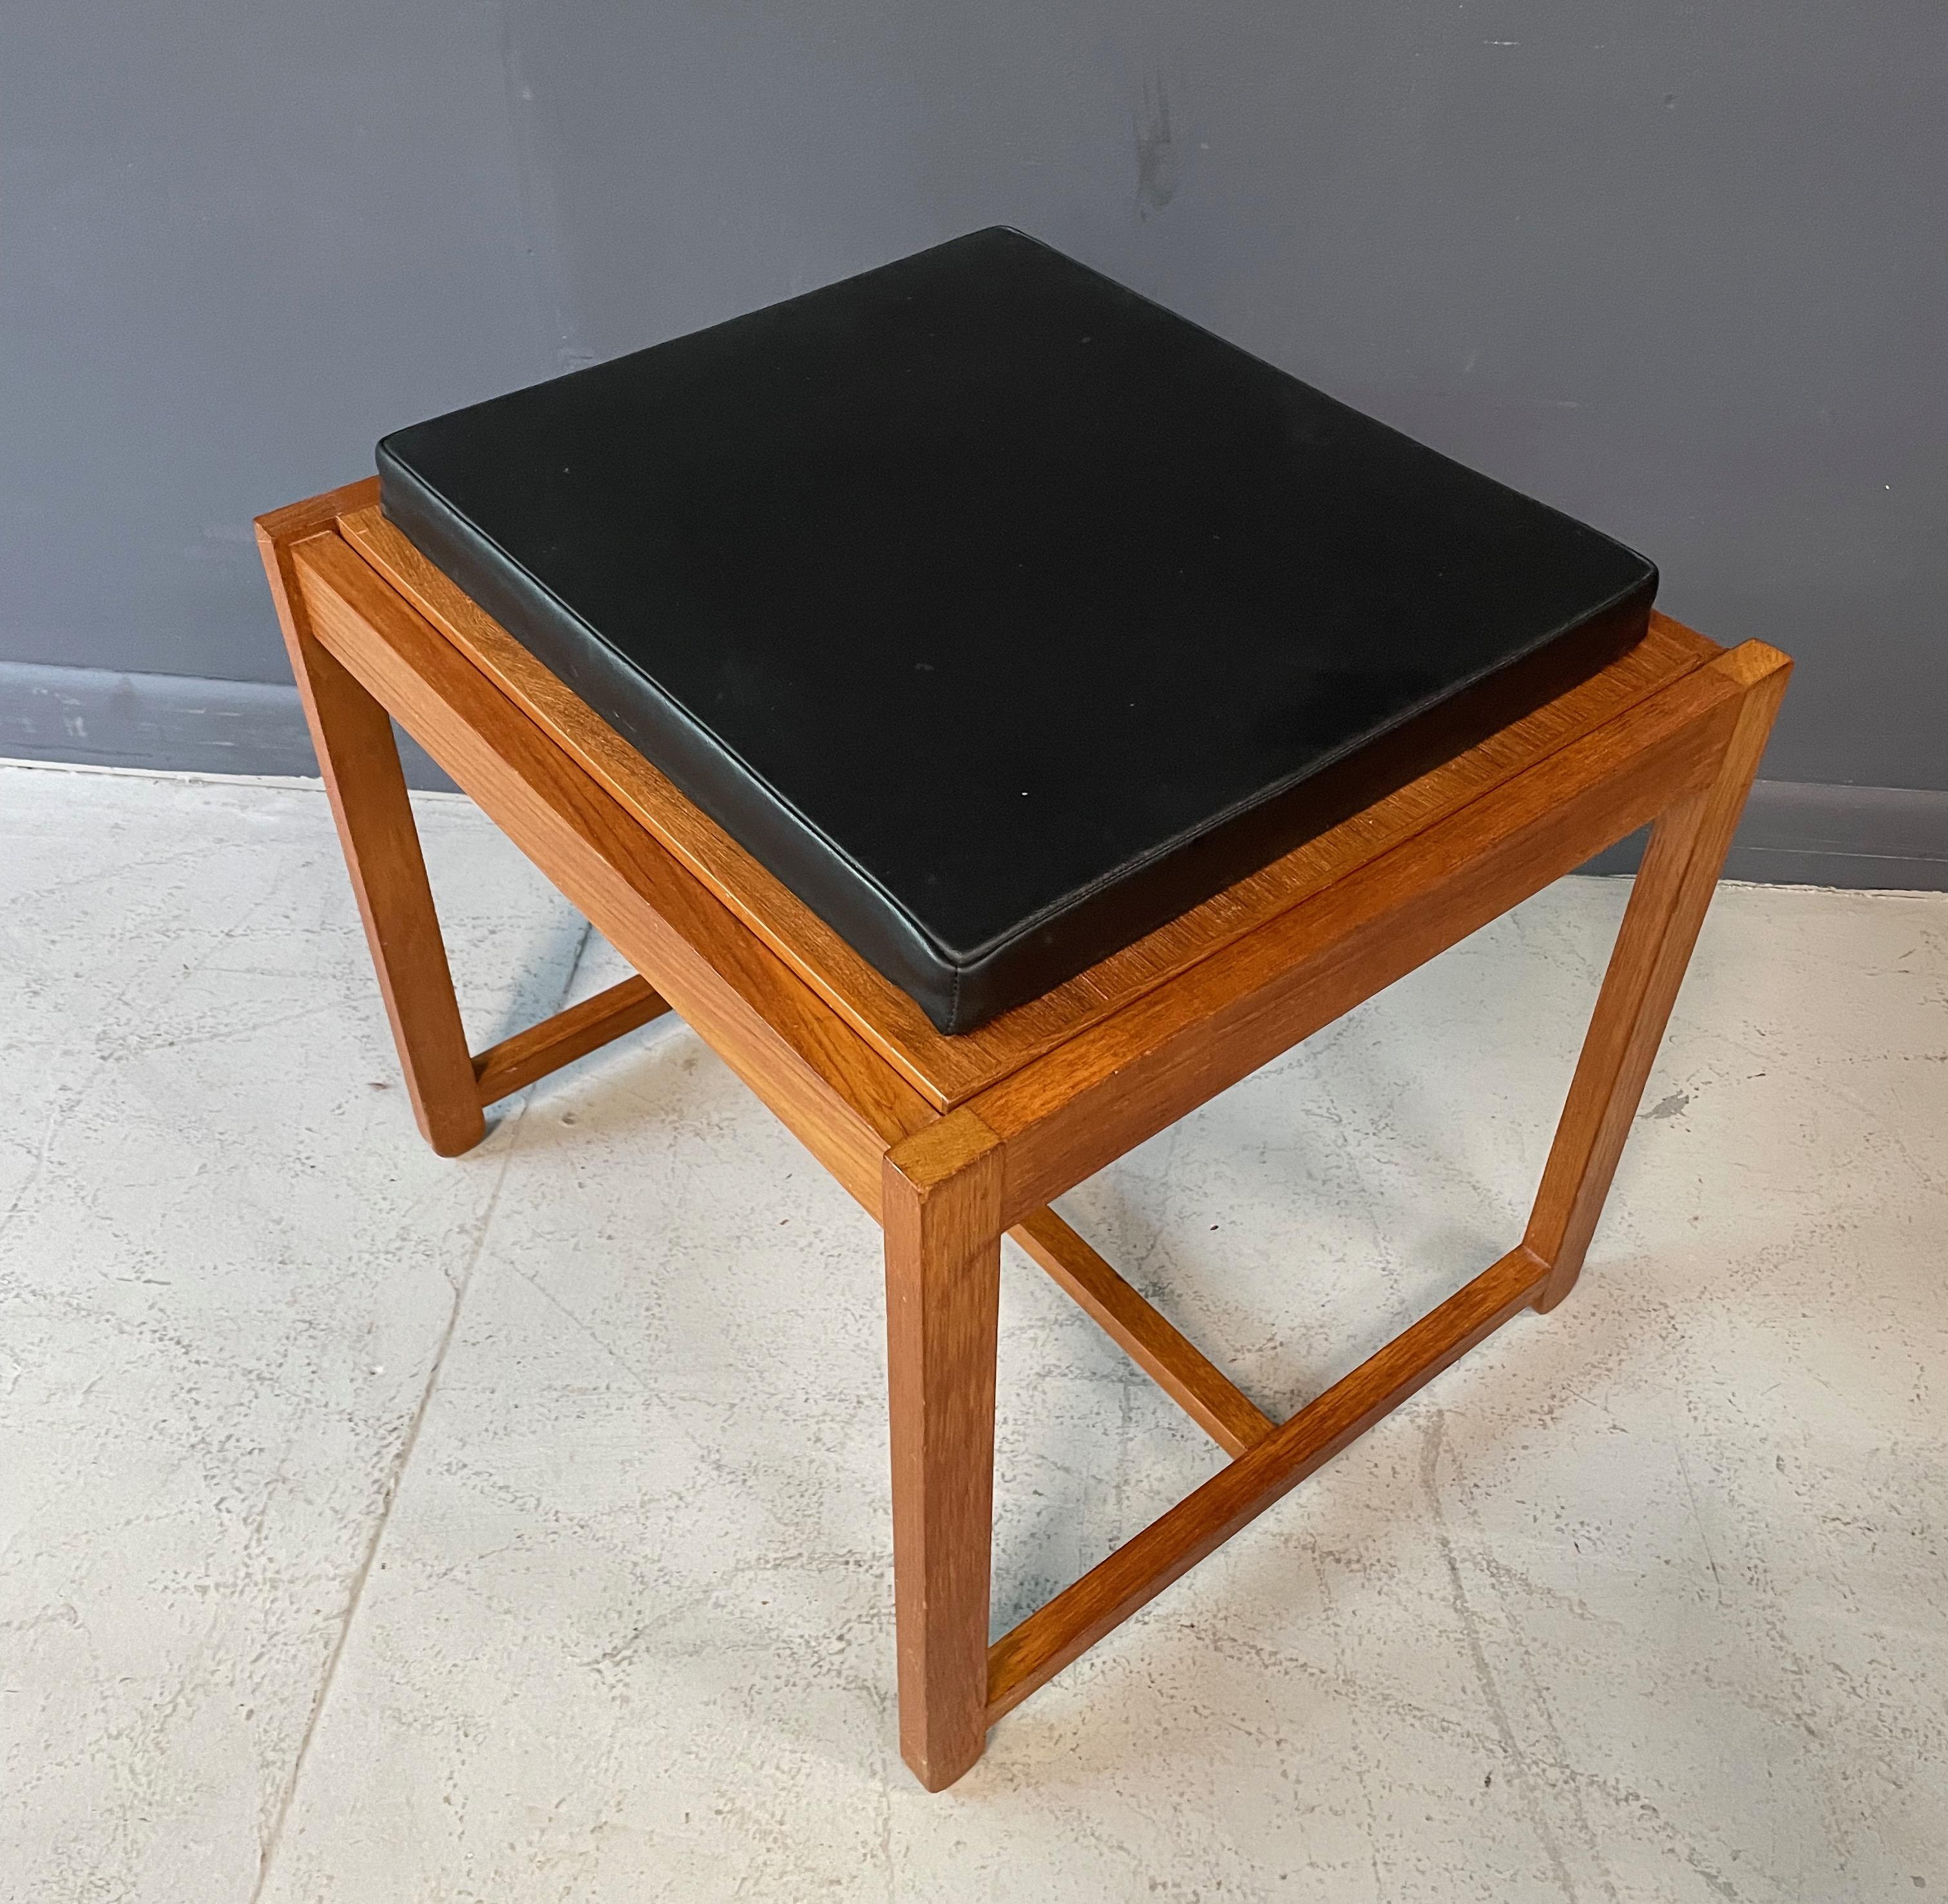 Designed in 1957 by Erik Buch. This piece has a wonderful architectural quality about it. This is a reversible stool or makes great side table. Made in Odense, Denmark.